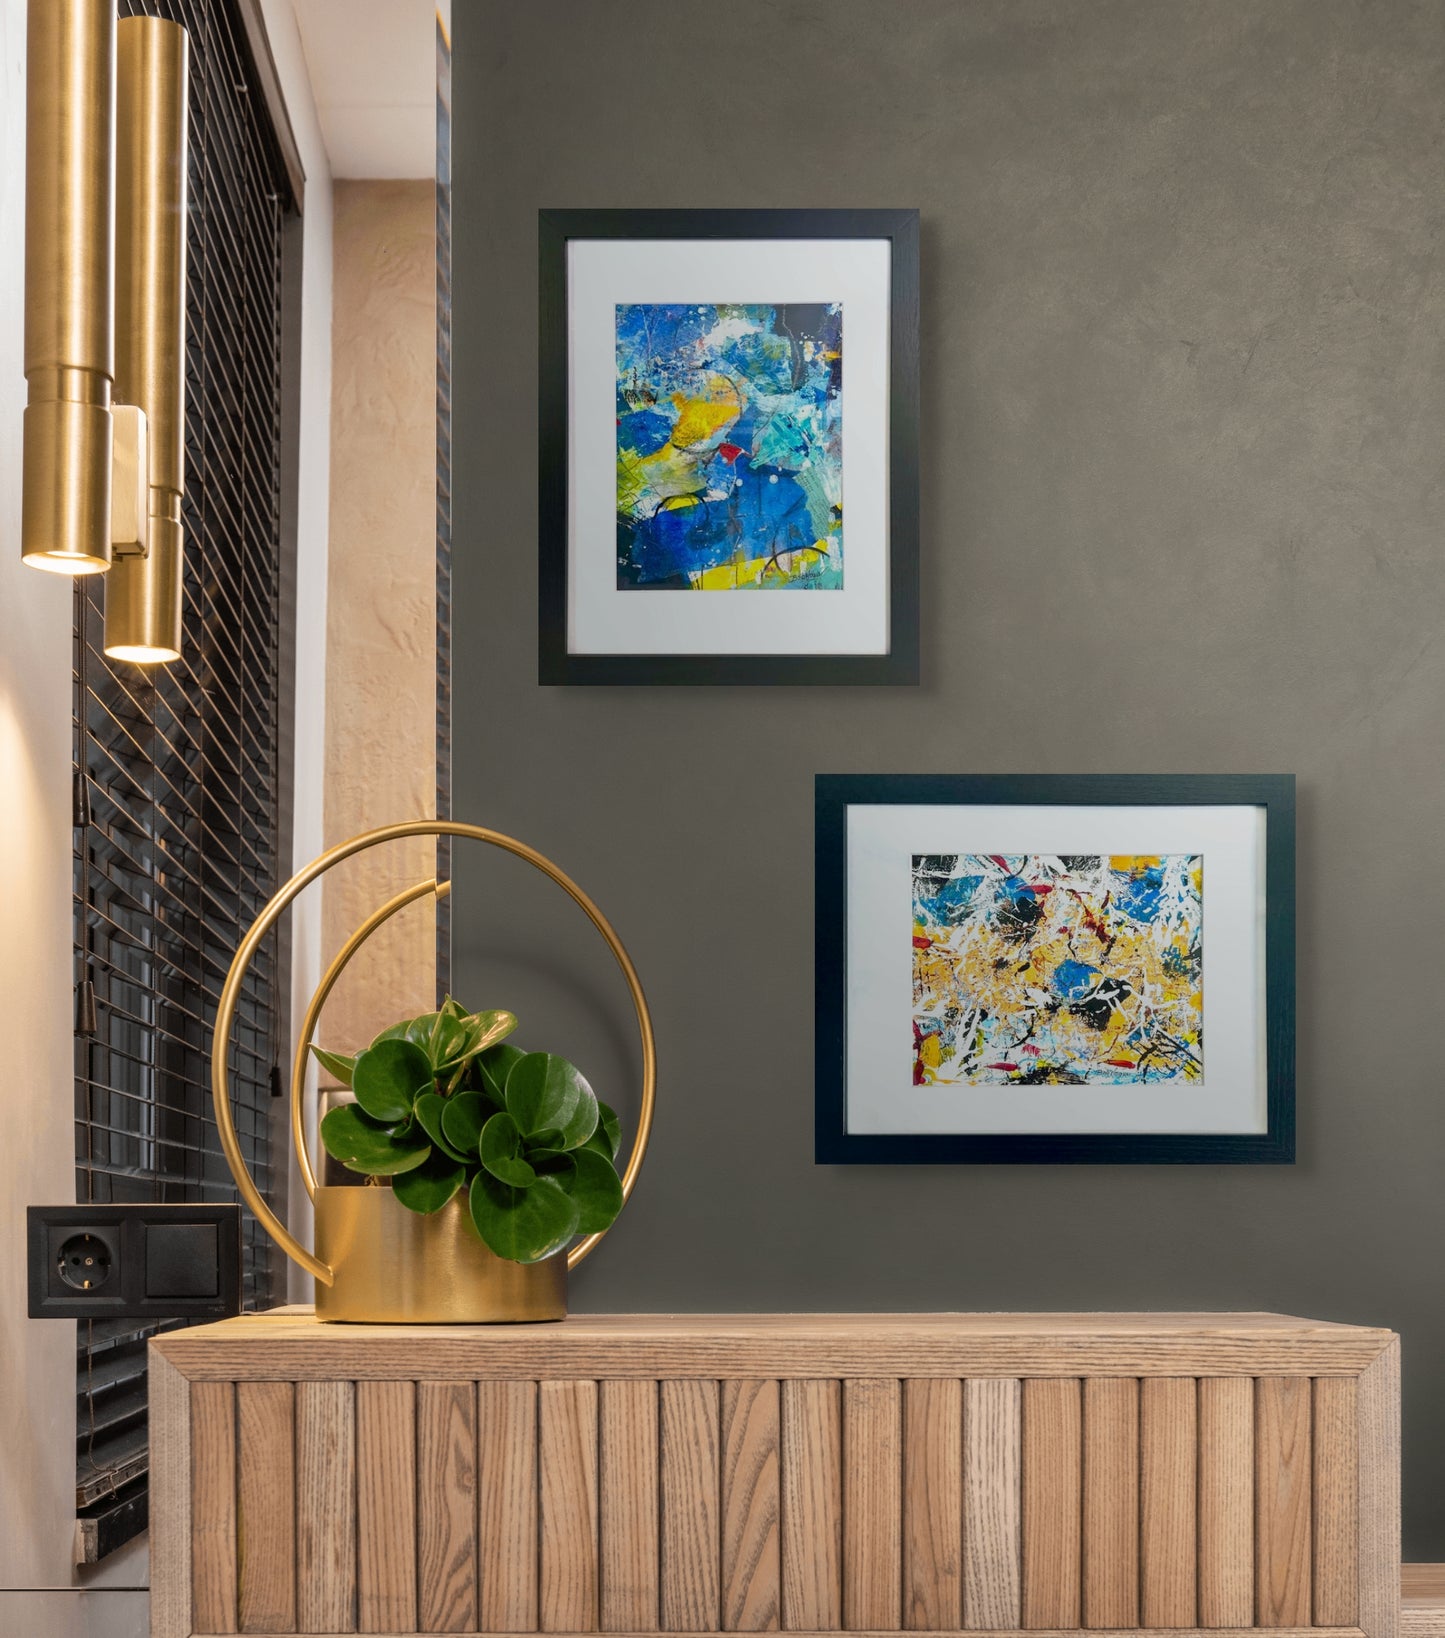 Colorful abstract painting using acrylic; predominant blue, yellow, with teal highlights; artist Bob Hogue; 8"x10" and w/black wood frame and white mat 11"x 14"; shown in situ with a second abstract painting by the artist